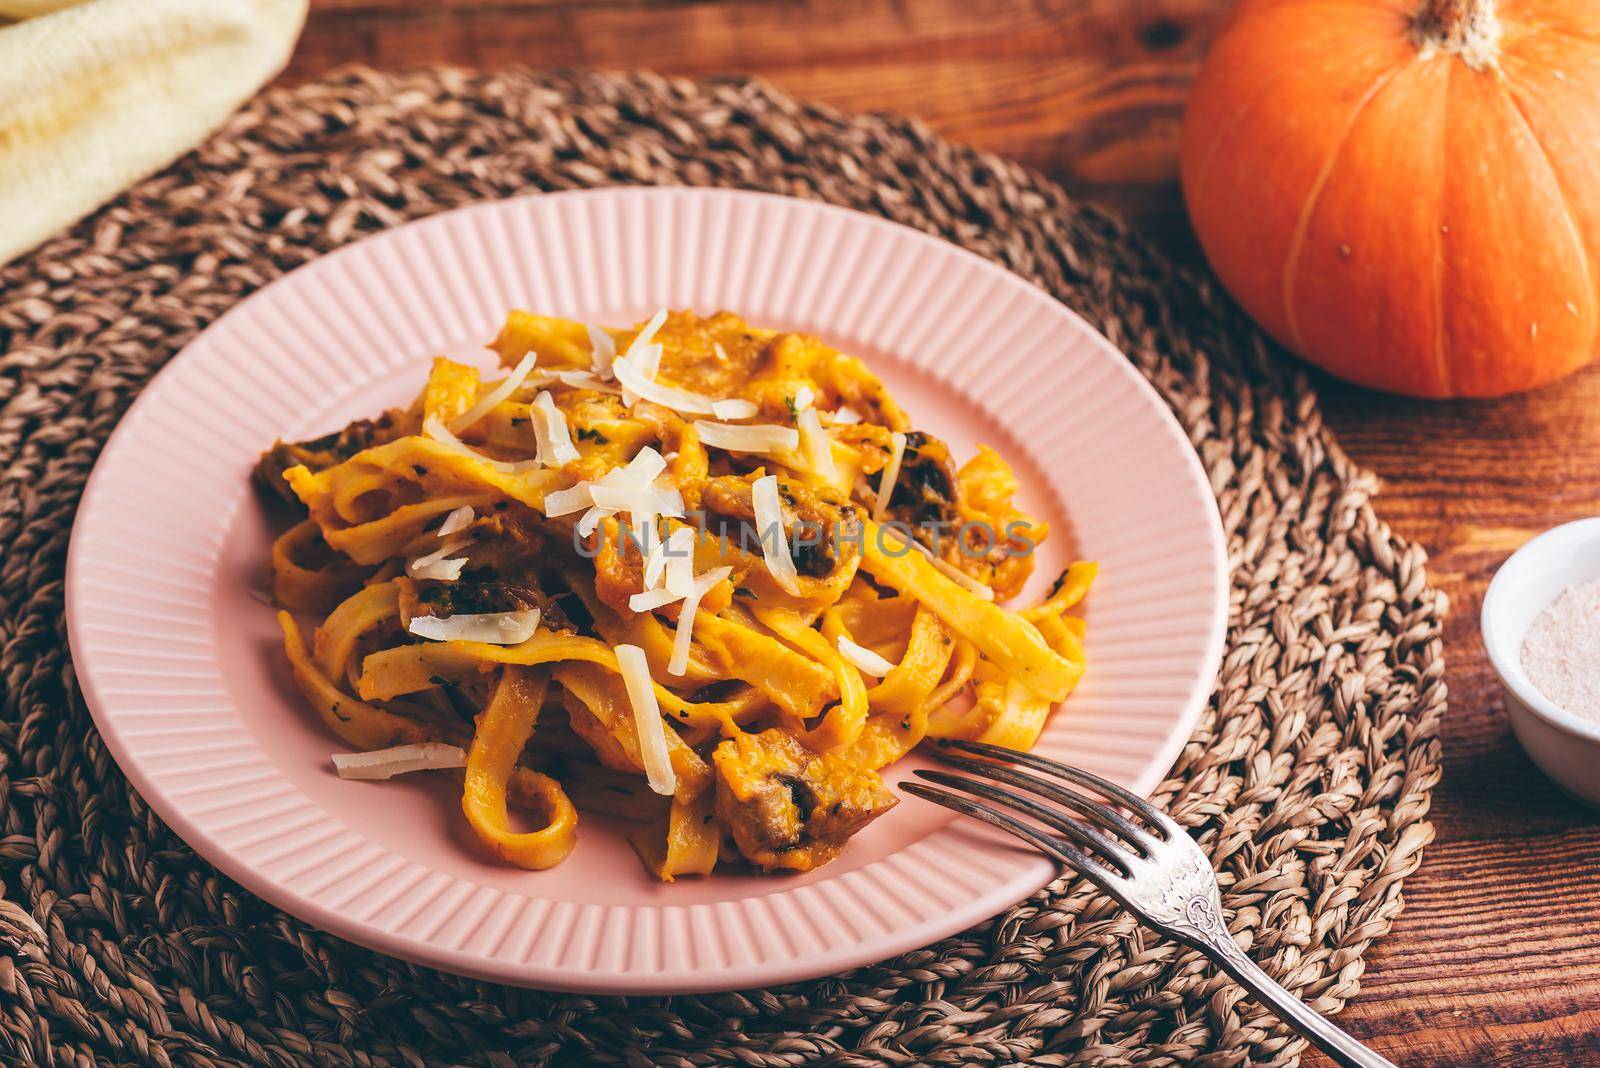 Fettuccine Pasta with Pumpkin Sauce and Mushrooms Garnished with Grated Parmesan Cheese